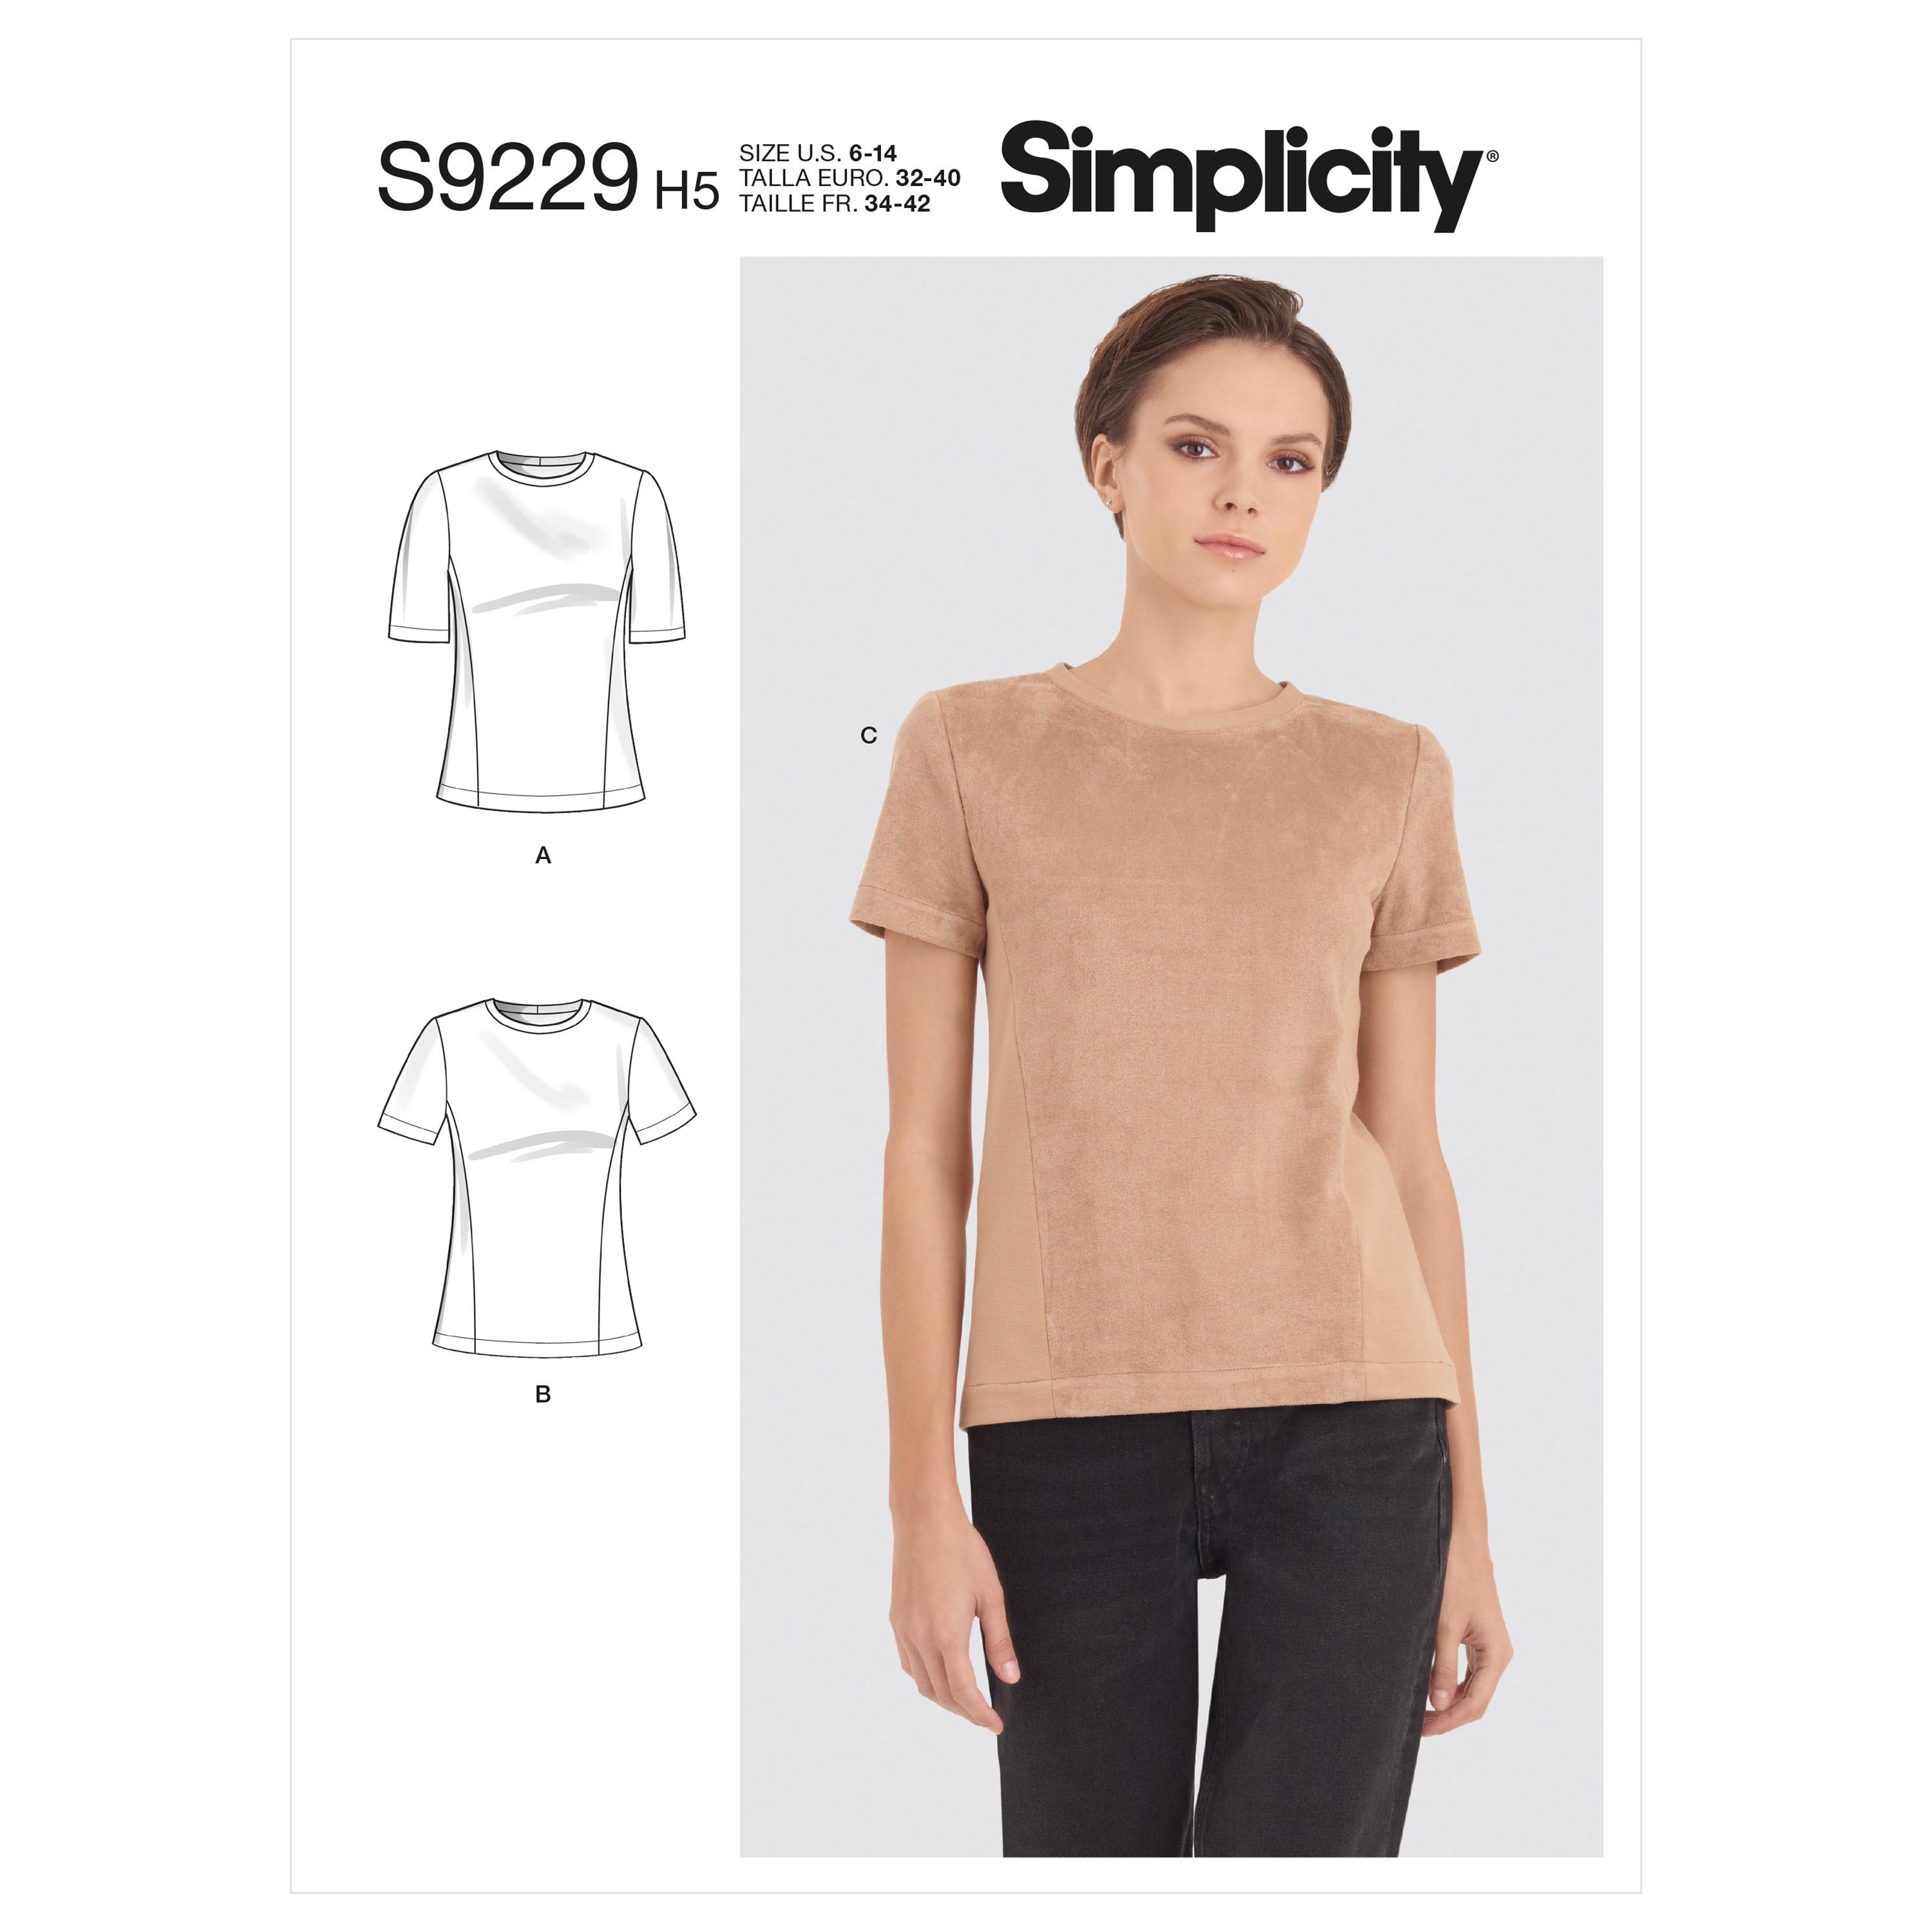 Simplicity Sewing Pattern S9229 Misses' Knit Tee Shirt